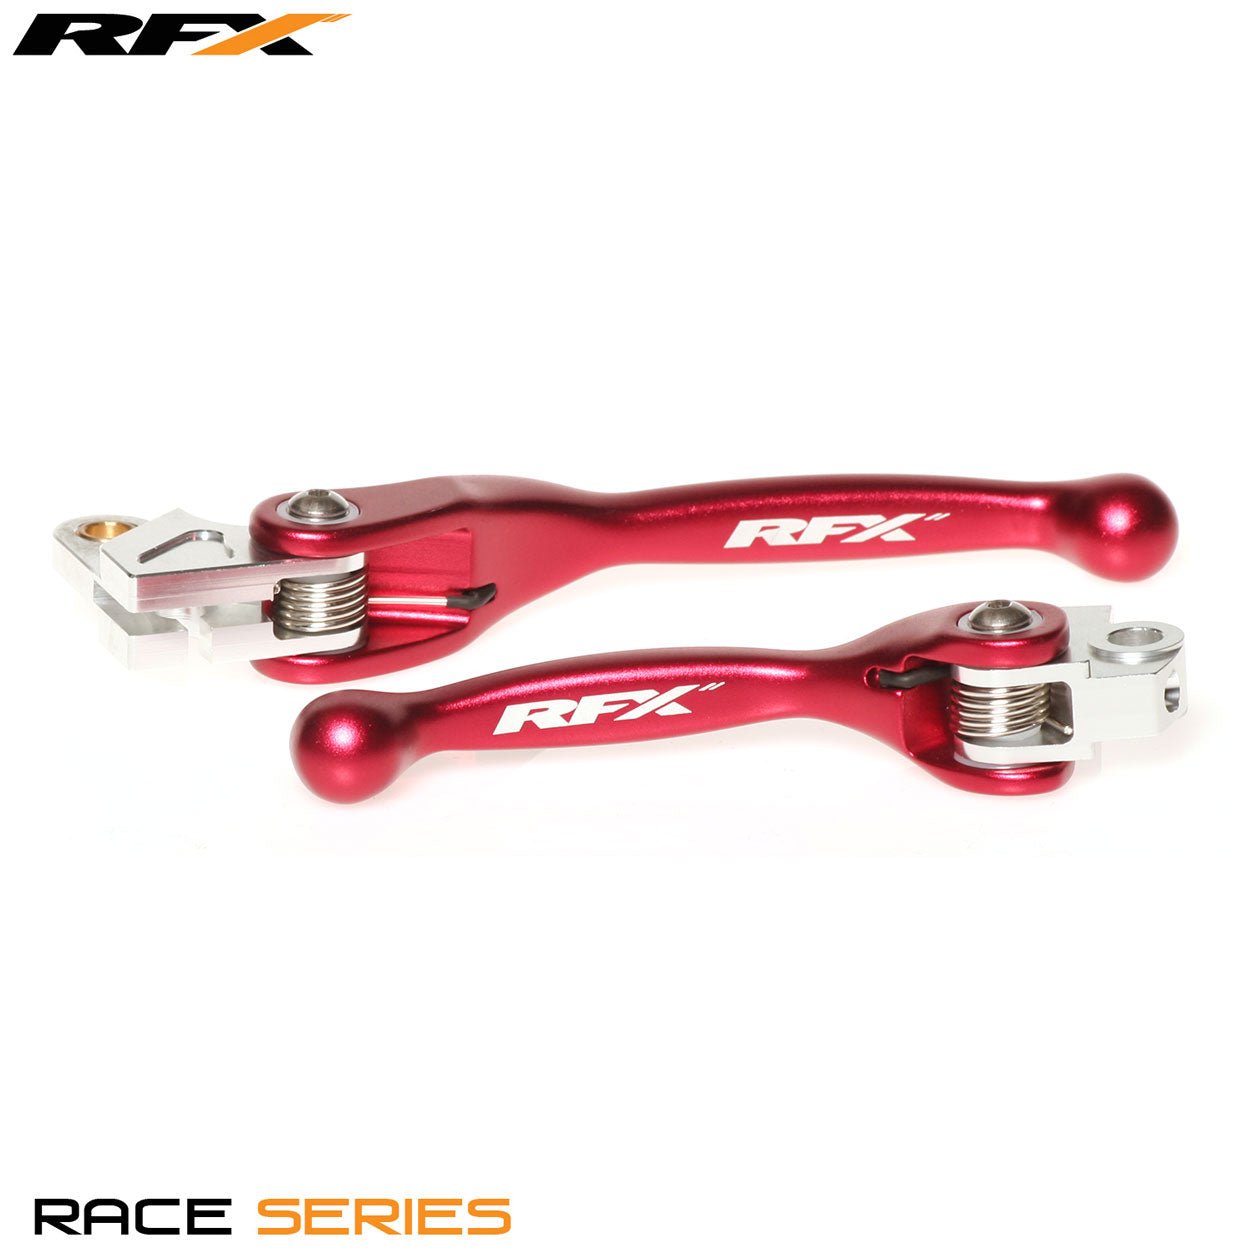 RFX Race Forged Flexible Lever Set (Red) Honda CRF150 07-22 CR80/85 98-07 CR125/250 92-03 - Red - RFX